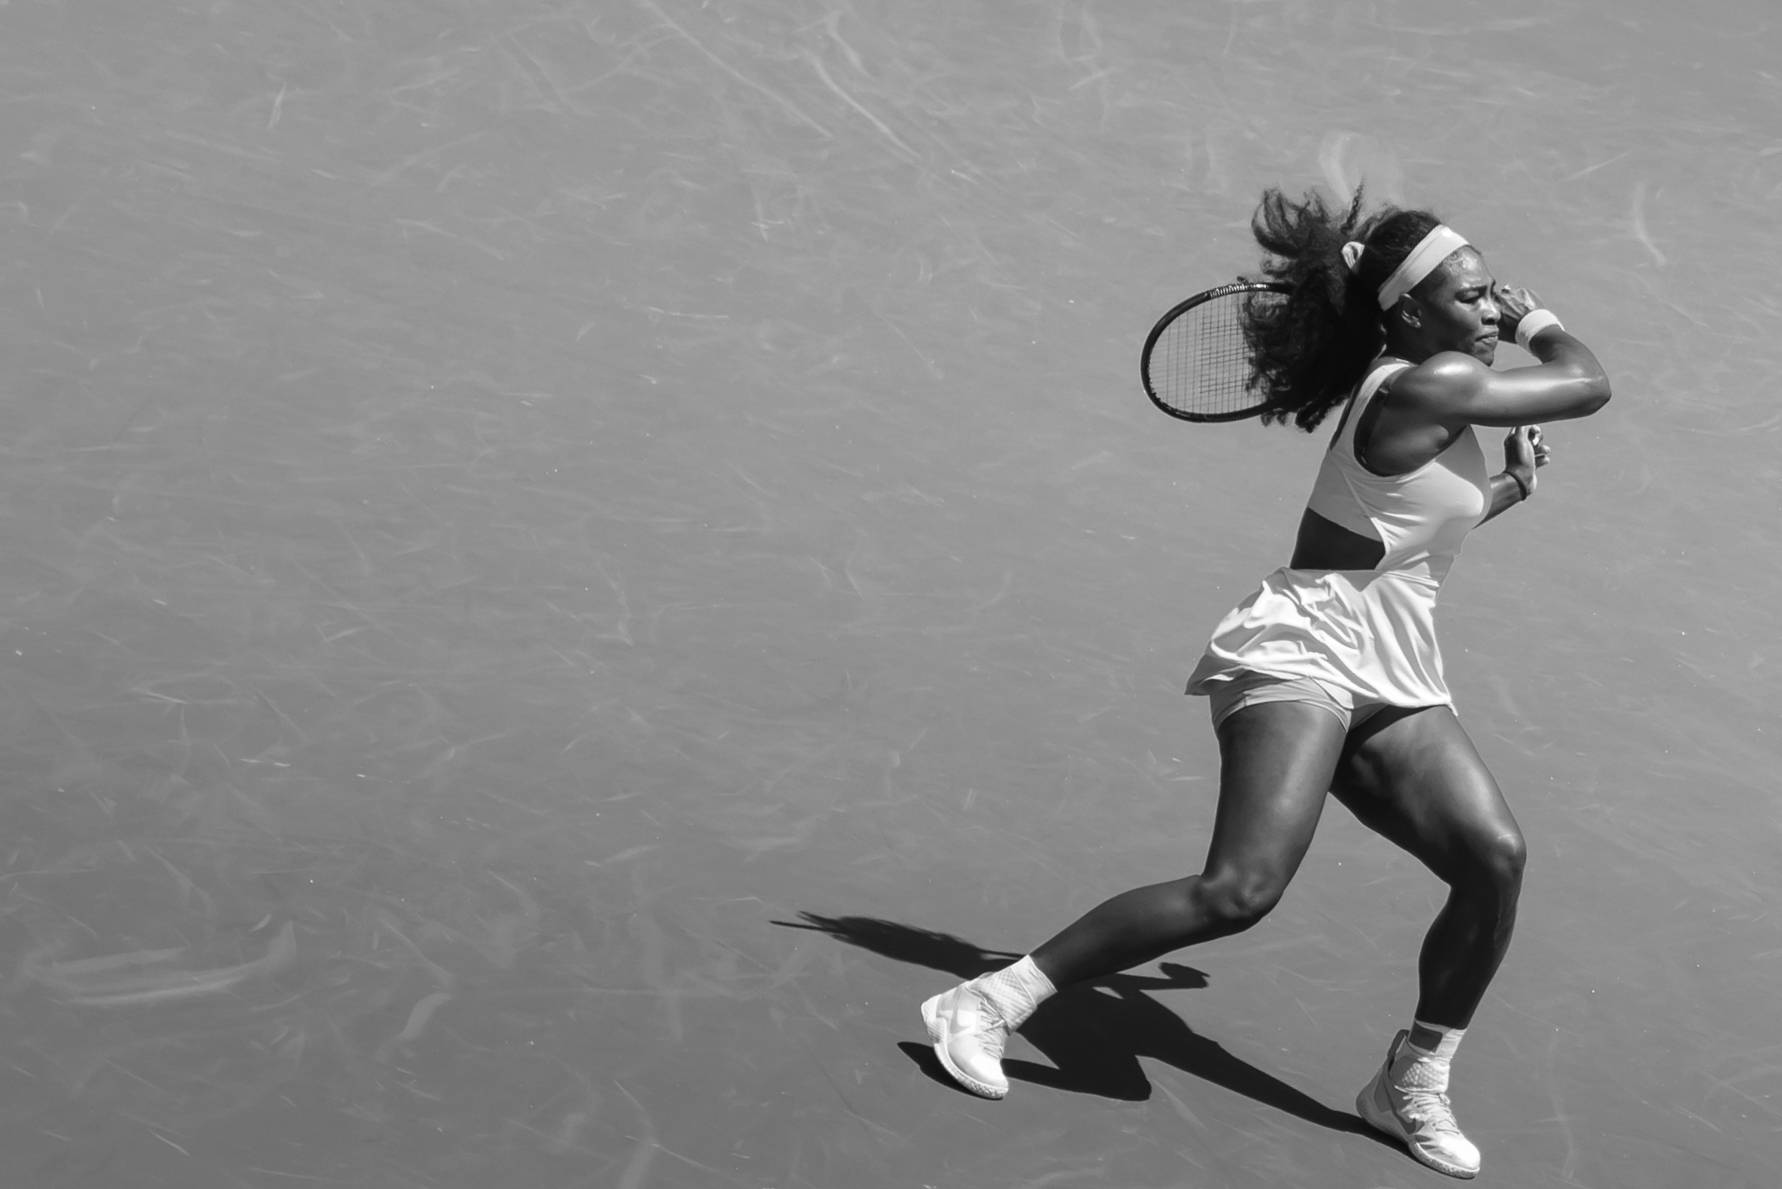 Serena Williams won her eighth Key Biscayne, Miami Open title while she has not been beaten in 2015, this is her 21-match winning in a row! ...only three women in the history of tennis had won an event eight times or more: Chris Evert, Martina Navratilova and Steffi Graf, which is about as esteemed list as you can get. After a dominant 6-2, 6-0 over Carla Suarez Navarro in the finals of the Miami Open, Serena Williams can be added to it.  Ref: http://ftw.usatoday.com/2015/04/serena-williams-miami-open-record-martina-steffi-most-wins-at-a-tournament Despite Saturday's hammering, Suarez Navarro can be happy with her week in Miami where she captured some big scalps including that of Serena's elder sister Venus Williams in the quarter finals. Ref: http://edition.cnn.com/2015/04/04/tennis/serena-williams-miami-open/ Key Biscayne, Miami, Florida.